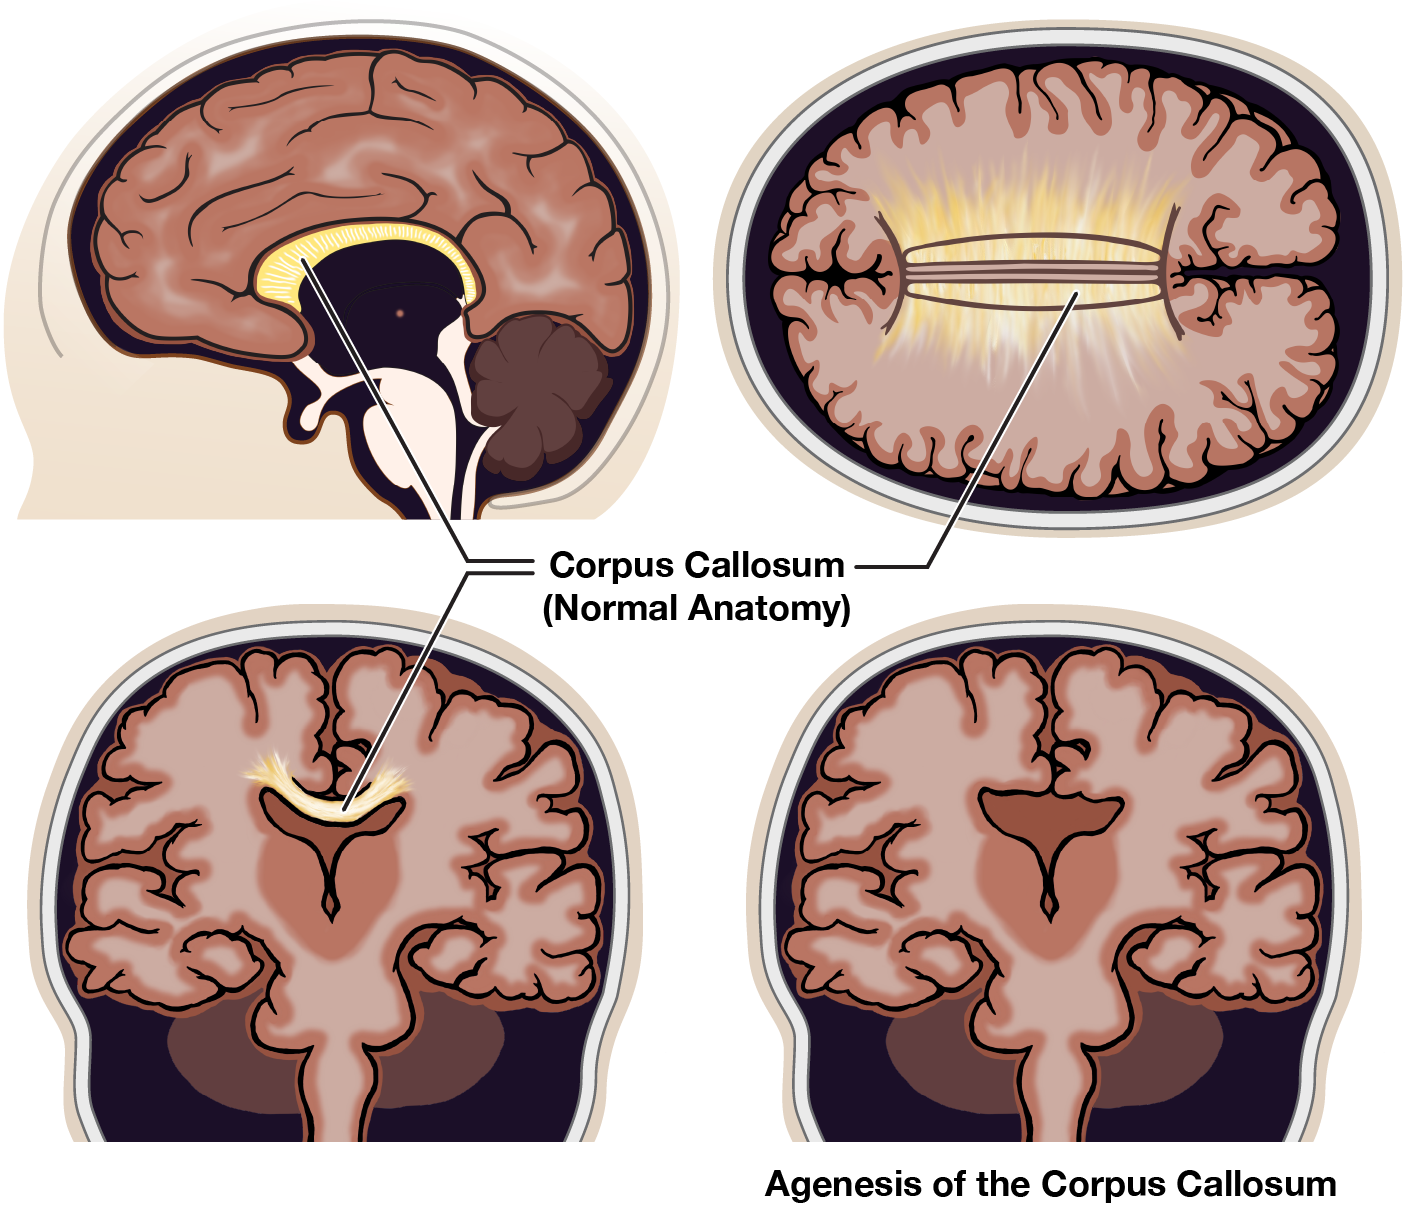 illustration of intact callosum compared to the missing nerve connections with agenesis of the corpus callosum